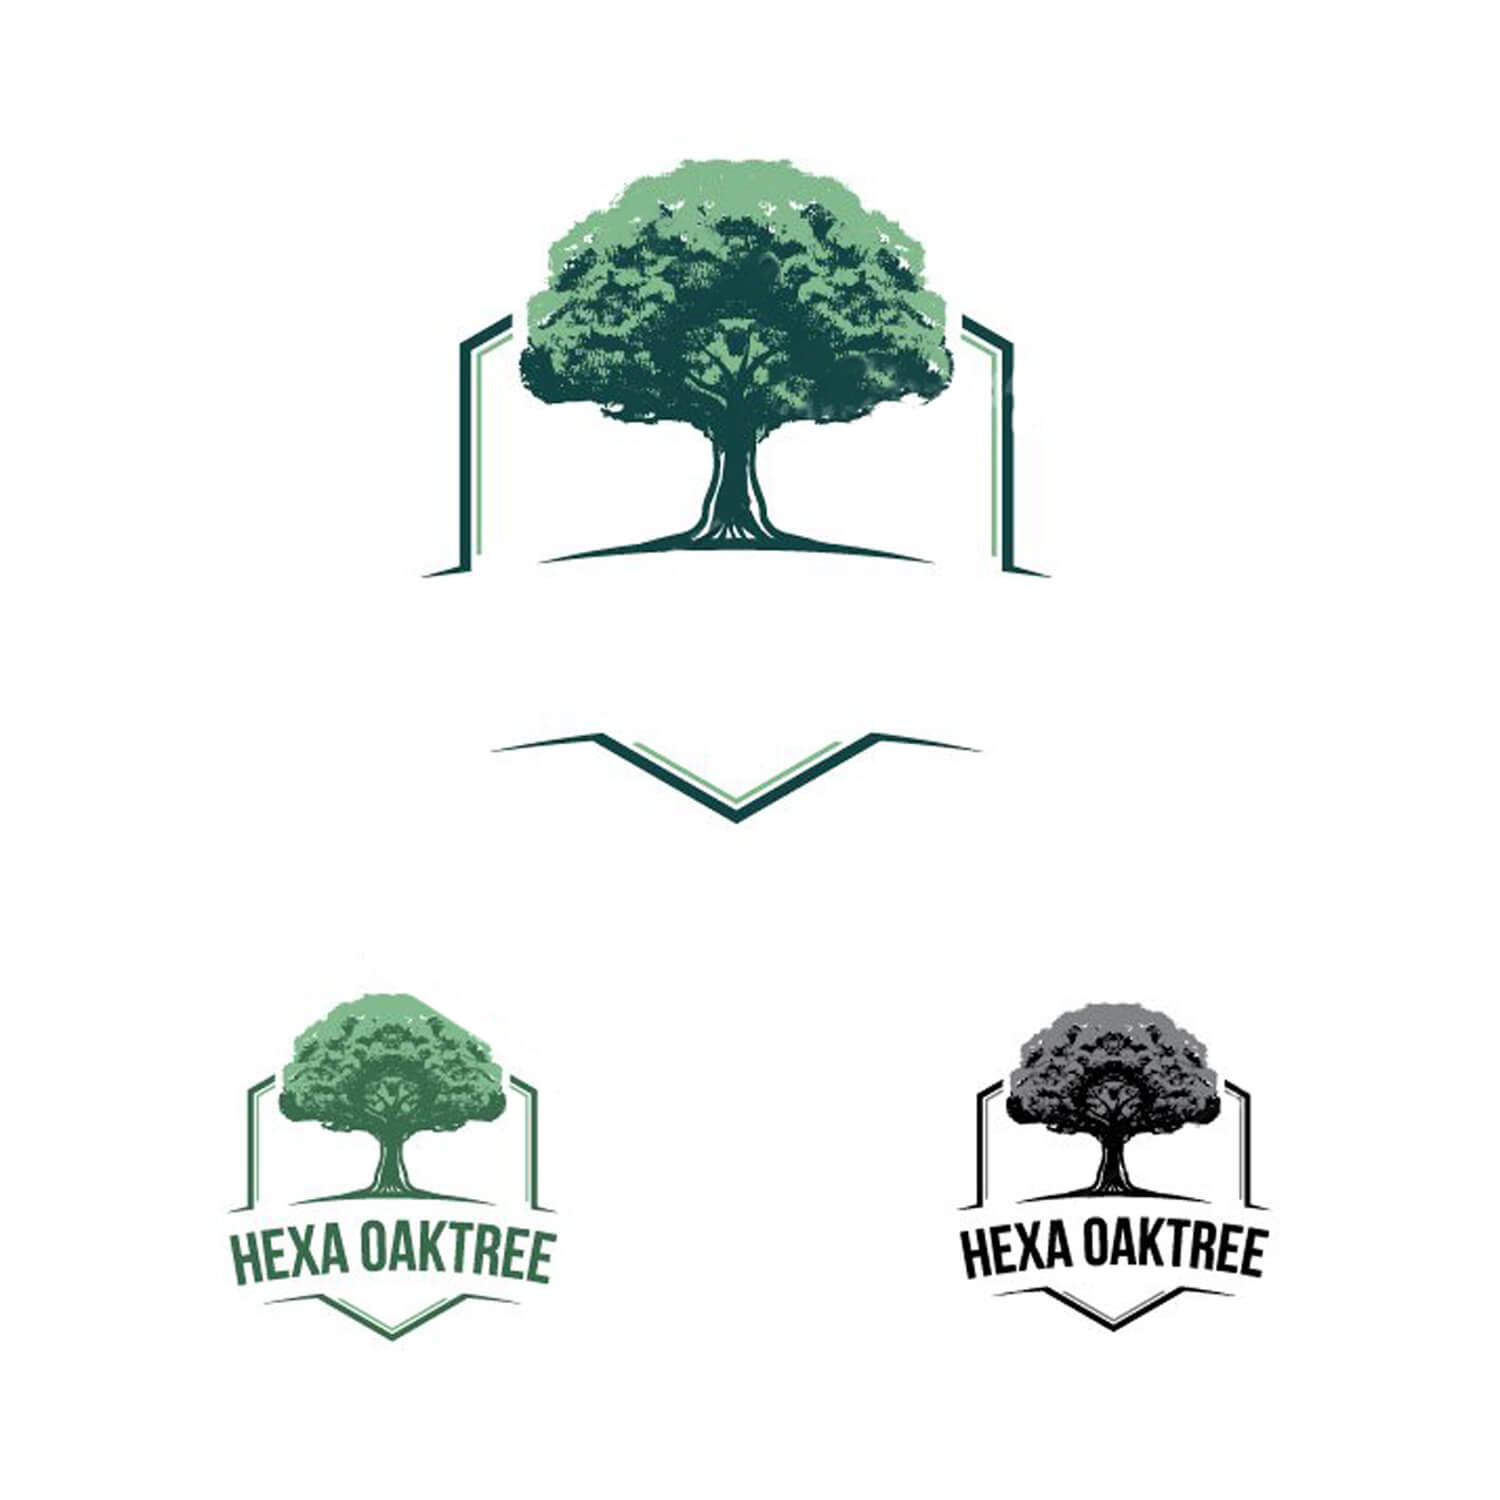 Three hexa oaktrees, two green and one grey.